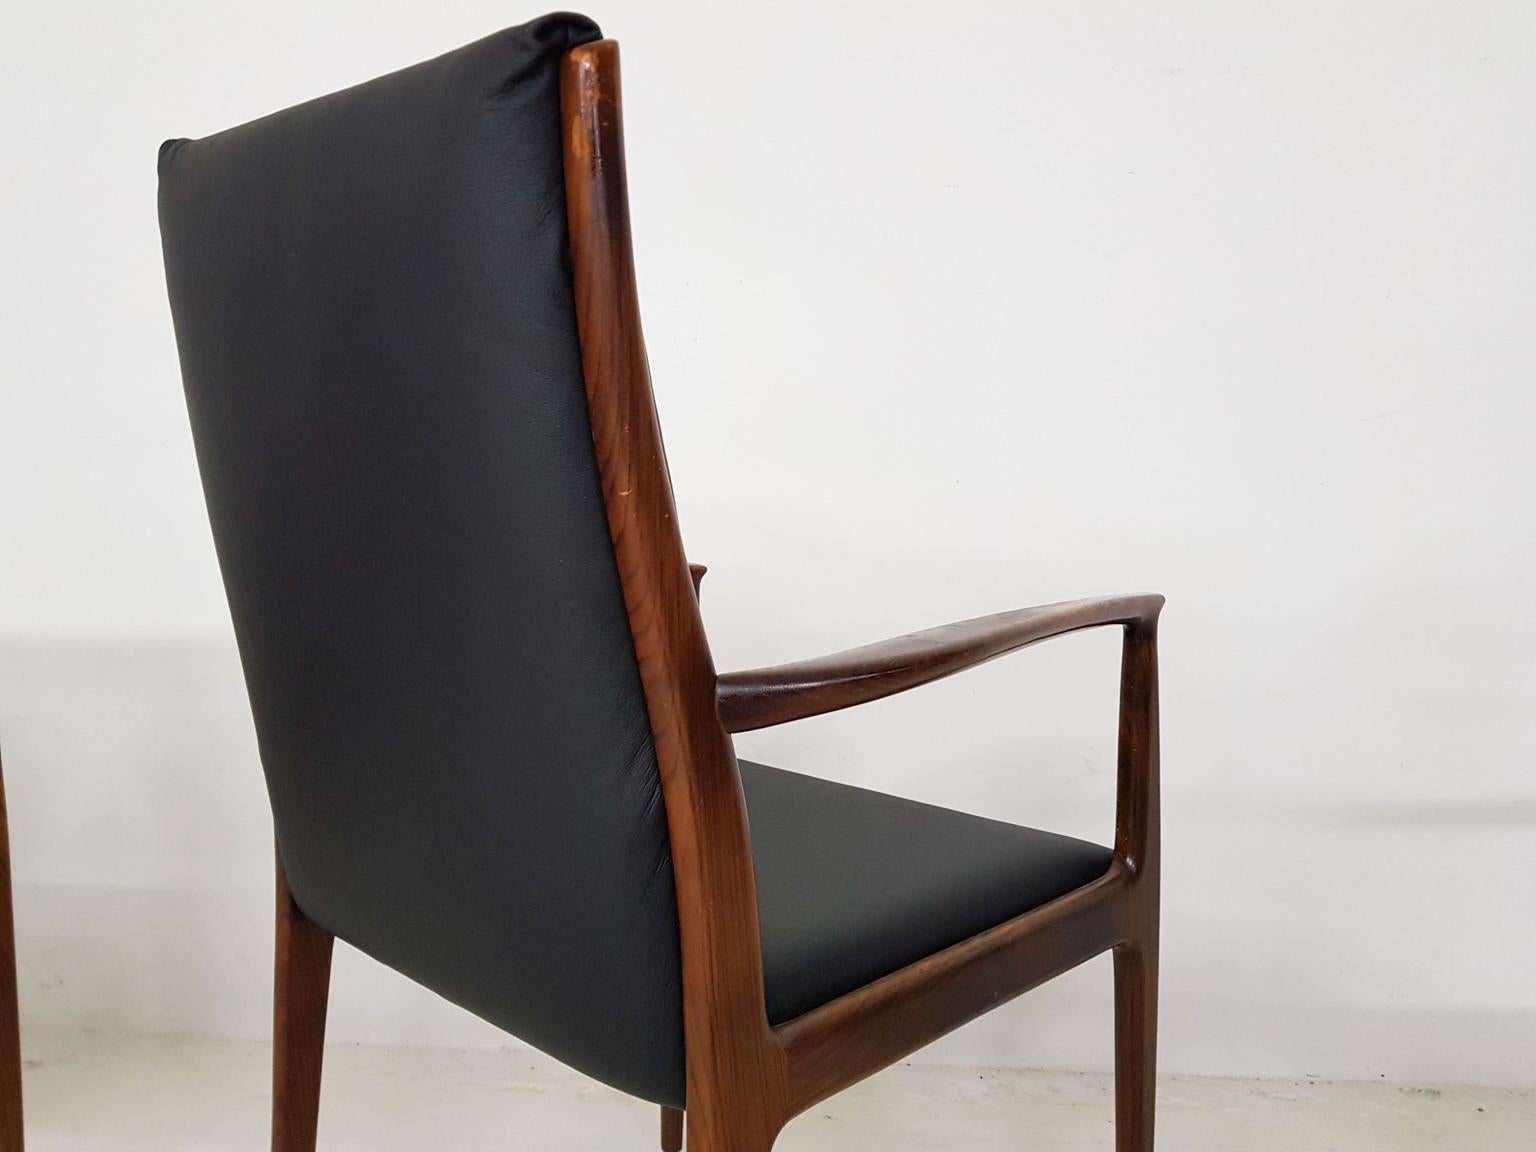 Set of 4 Rosewood and Black Leather Dining Chairs, Danish Modern, 1950s For Sale 3